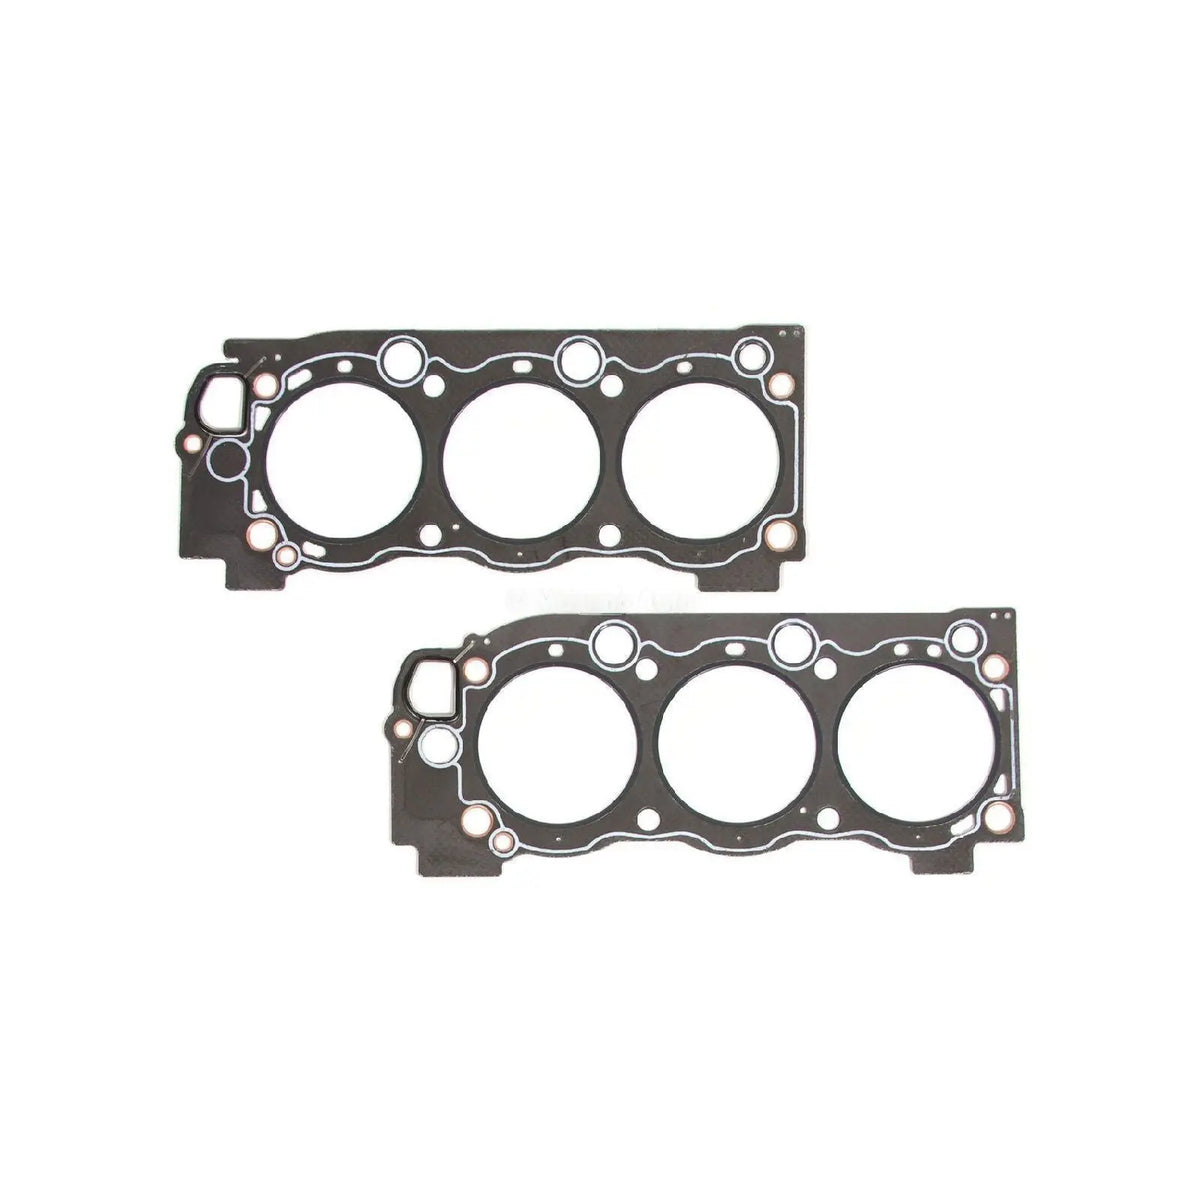 Graphite Head Gasket Fit Toyota Tacoma 4Runner T100 Tundra 3.4 5VZFE –  Dynamic Performance Tuning